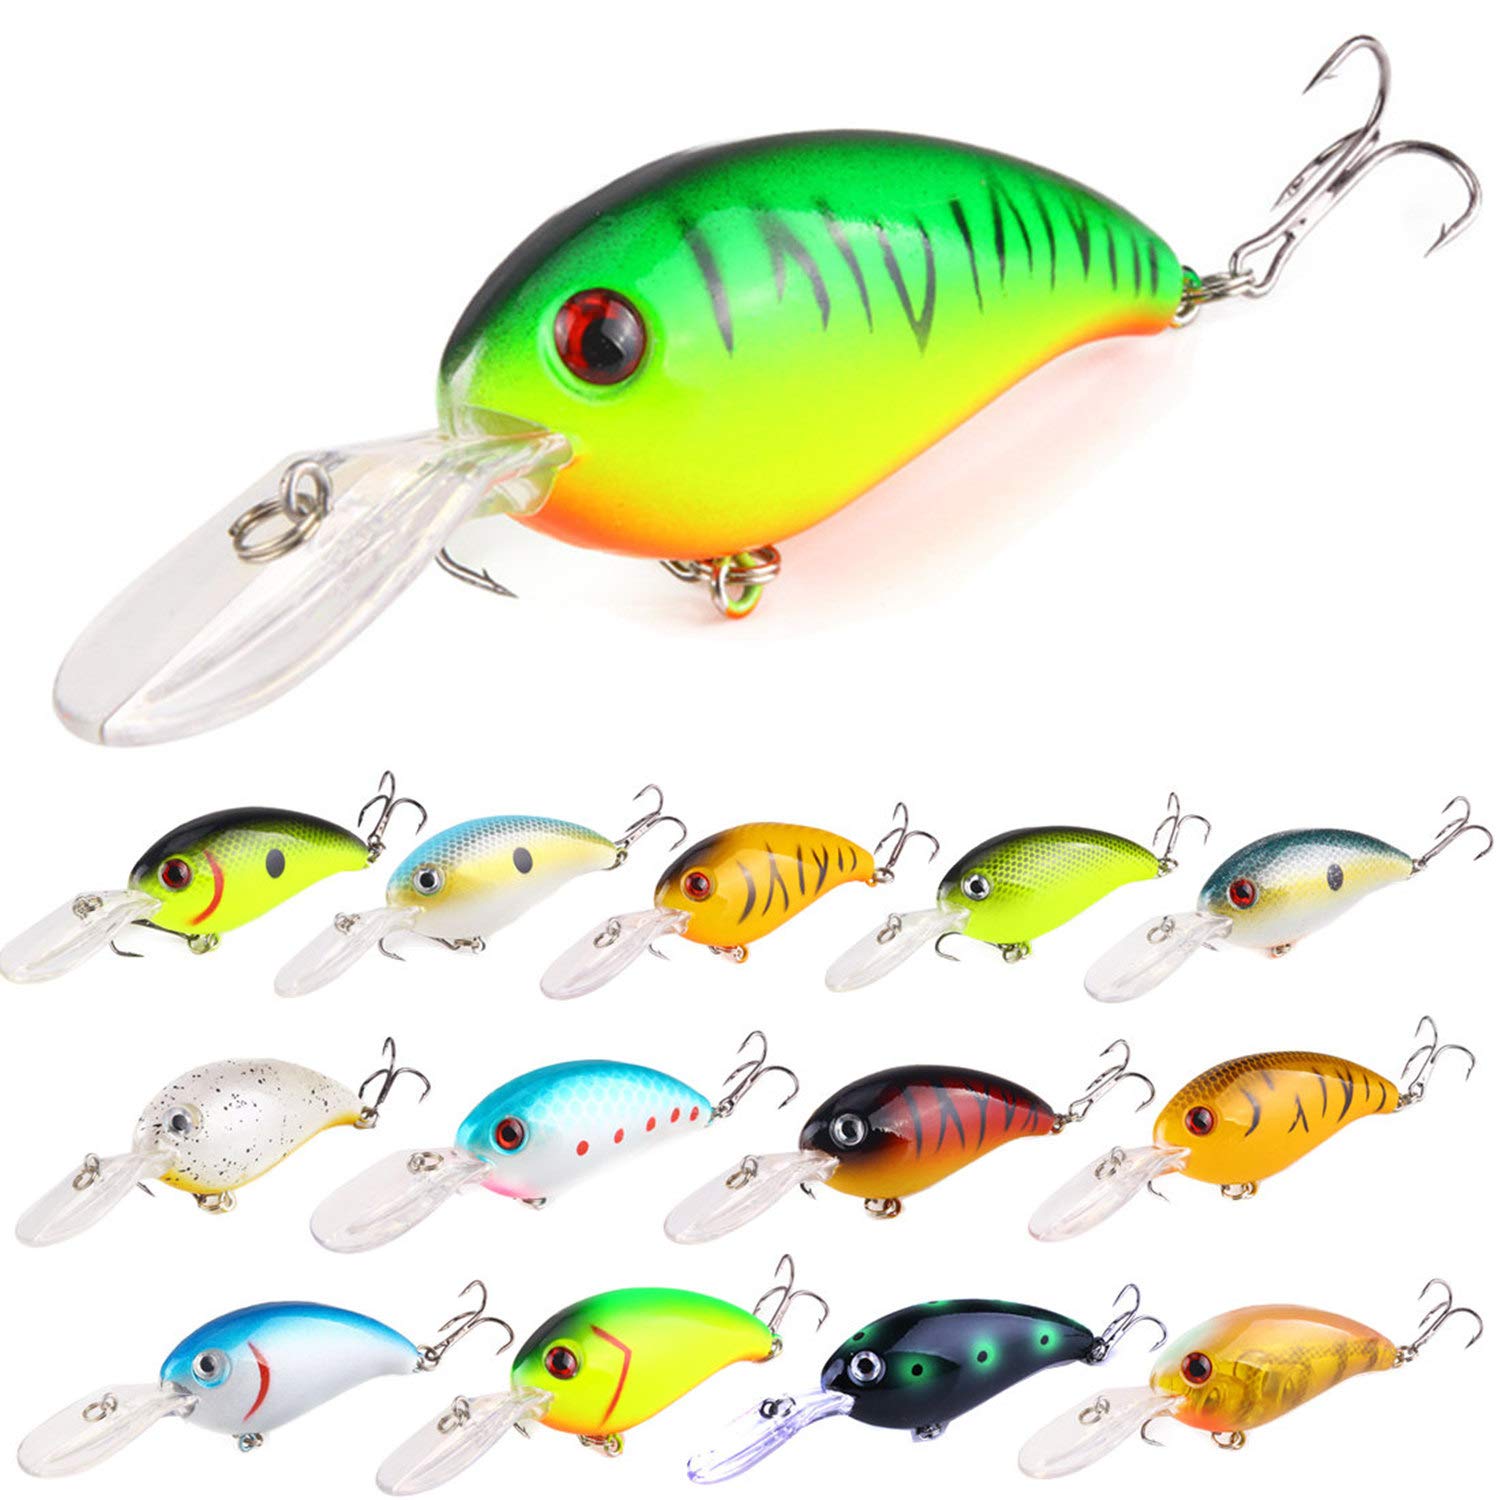 ZWMING Bass Crankbait Fishing Lures, Diving Fishing Lures Artificial Bait  with 3D Eyes, Lifelike Swimbait for